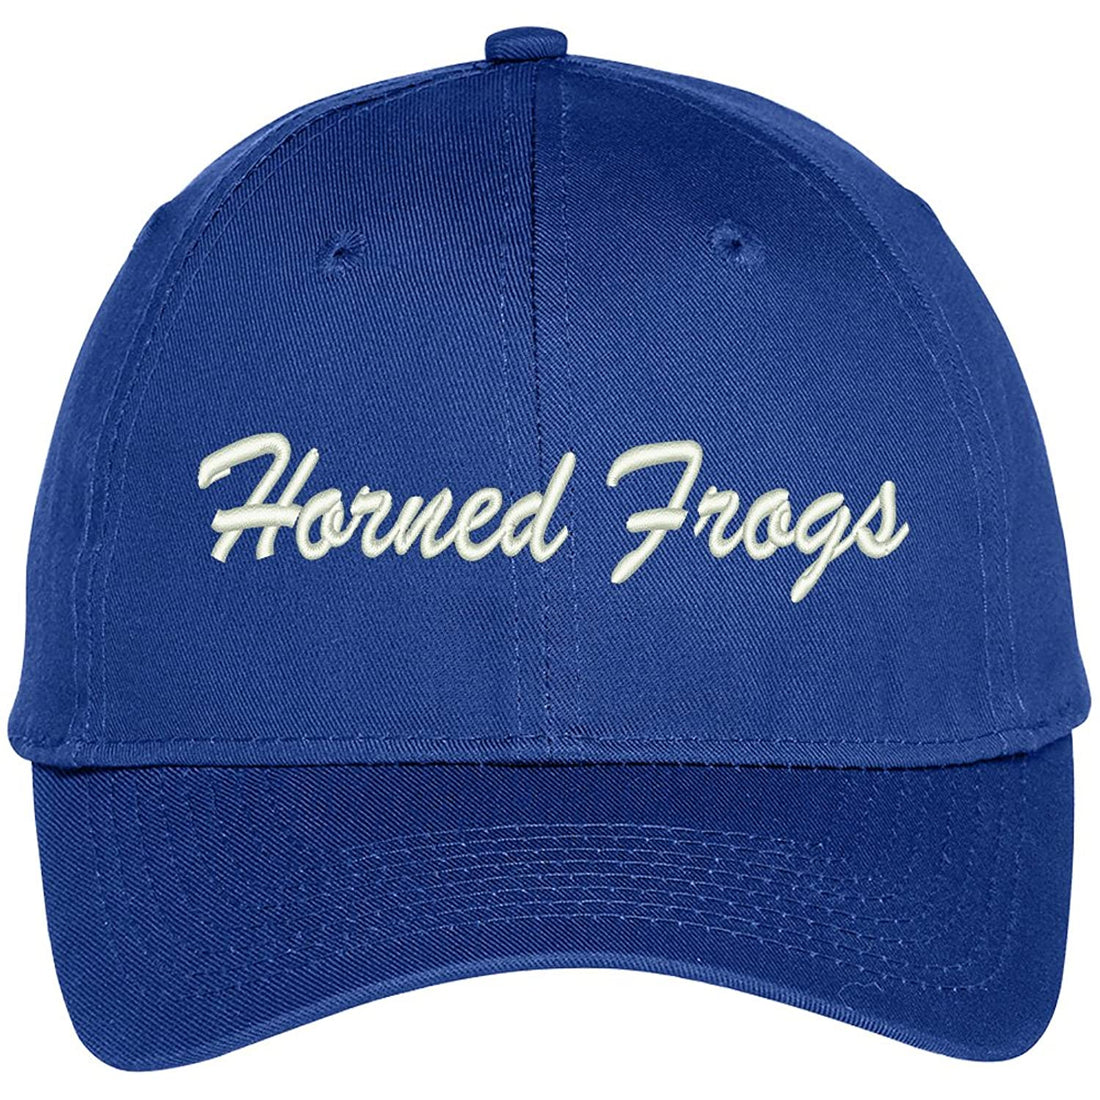 Trendy Apparel Shop Horned Frogs Embroidered Team Nickname Mascot Cap